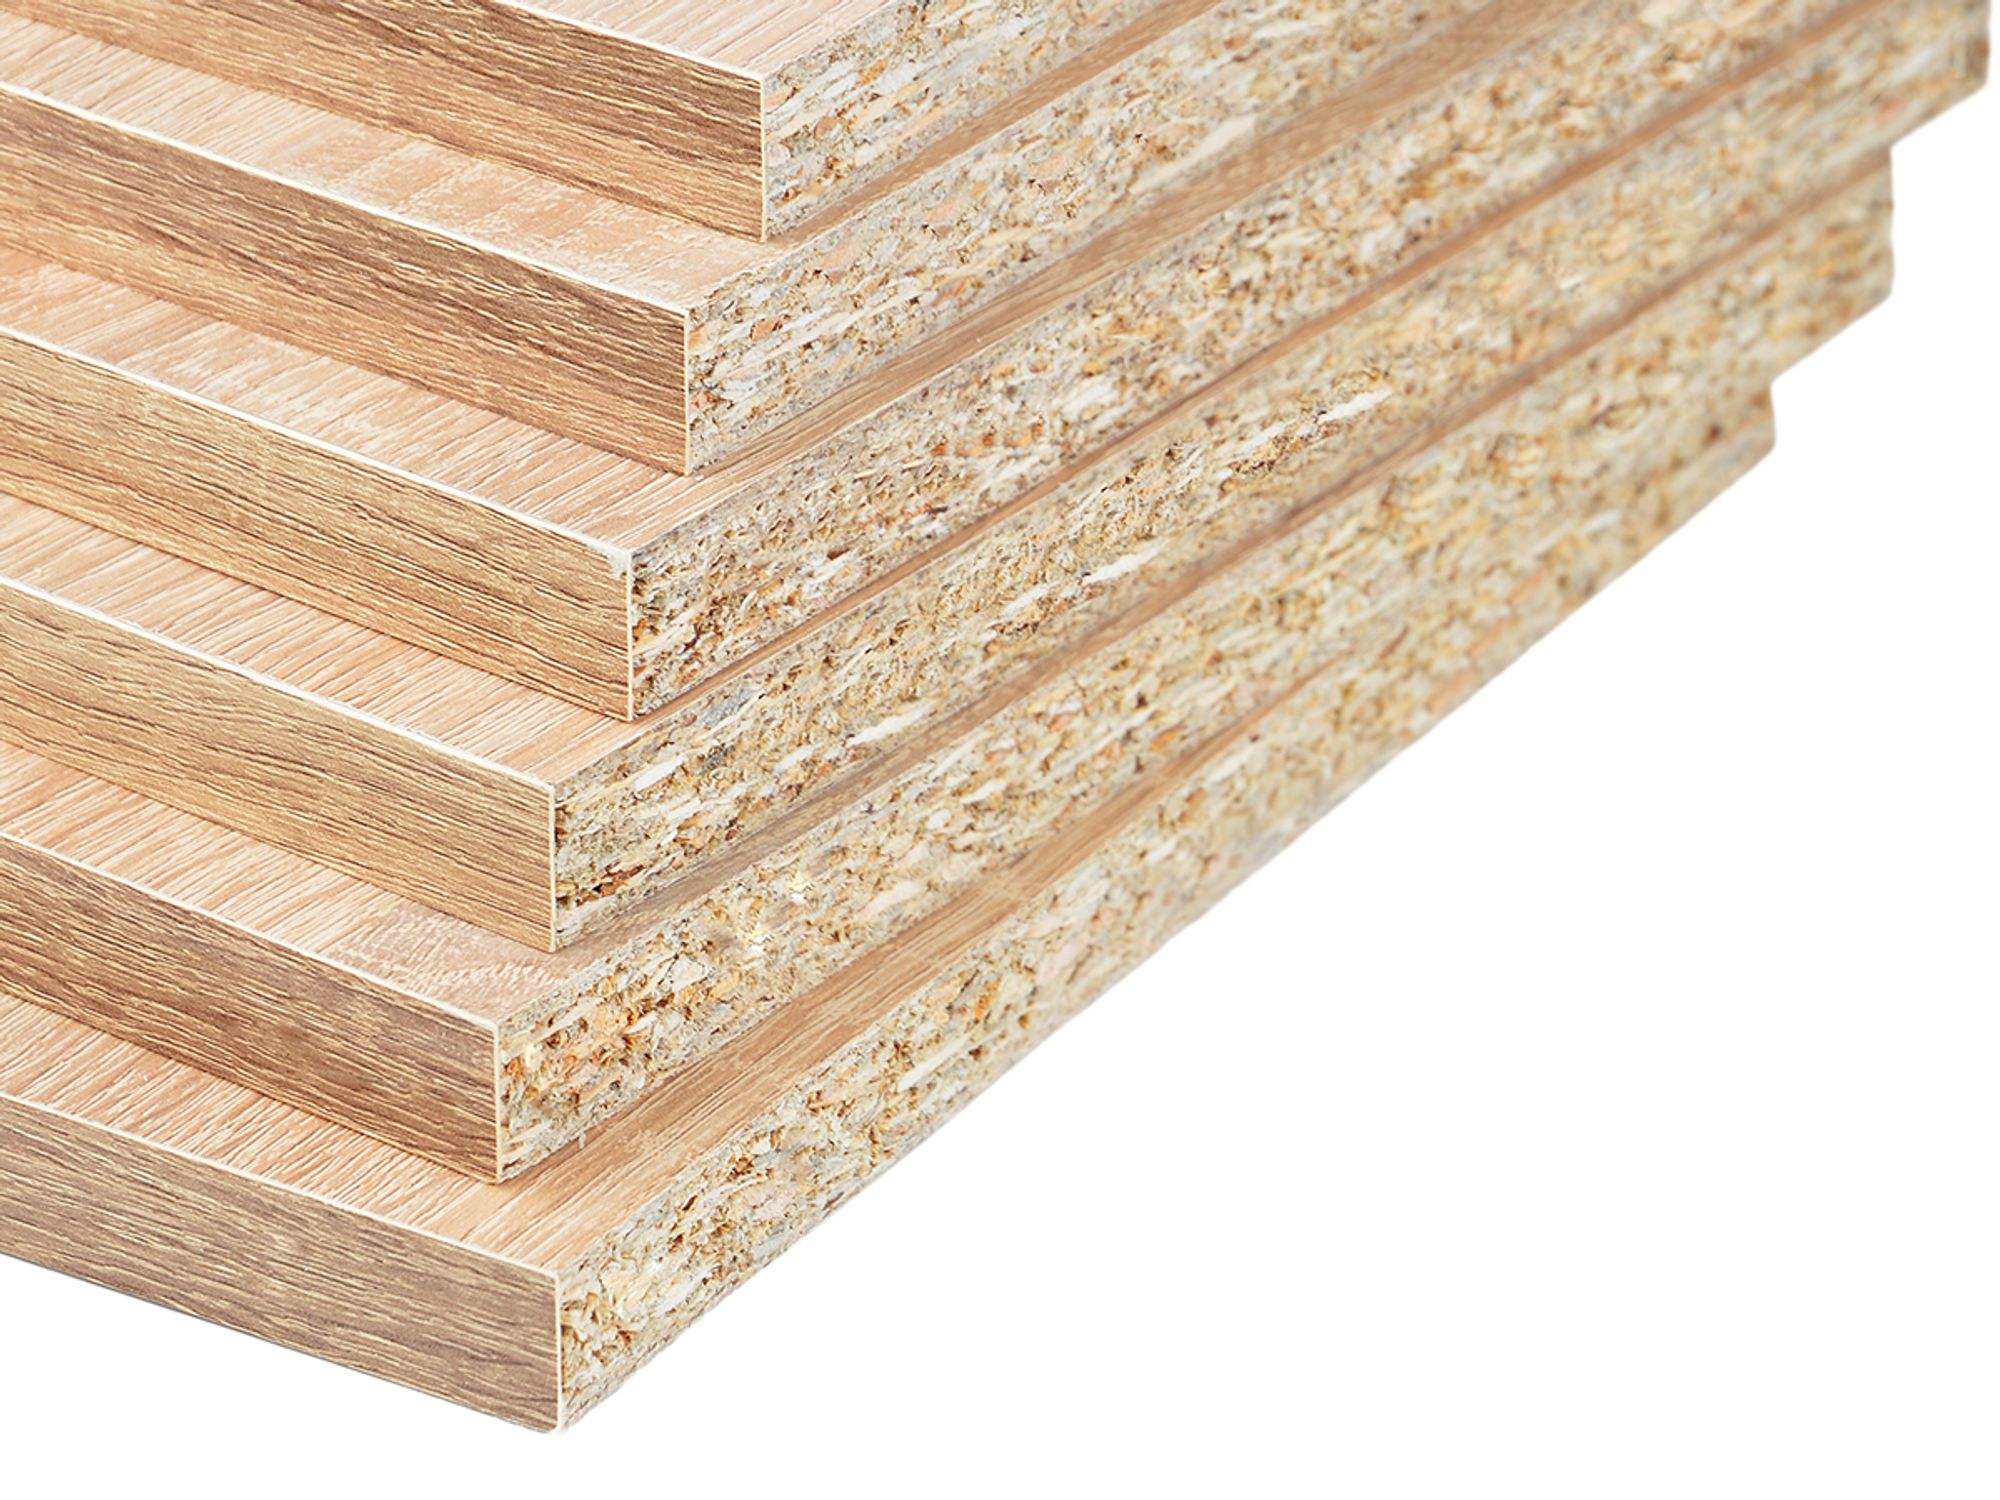 TSCA Title VI Formaldehyde Standards for Composite Wood Products